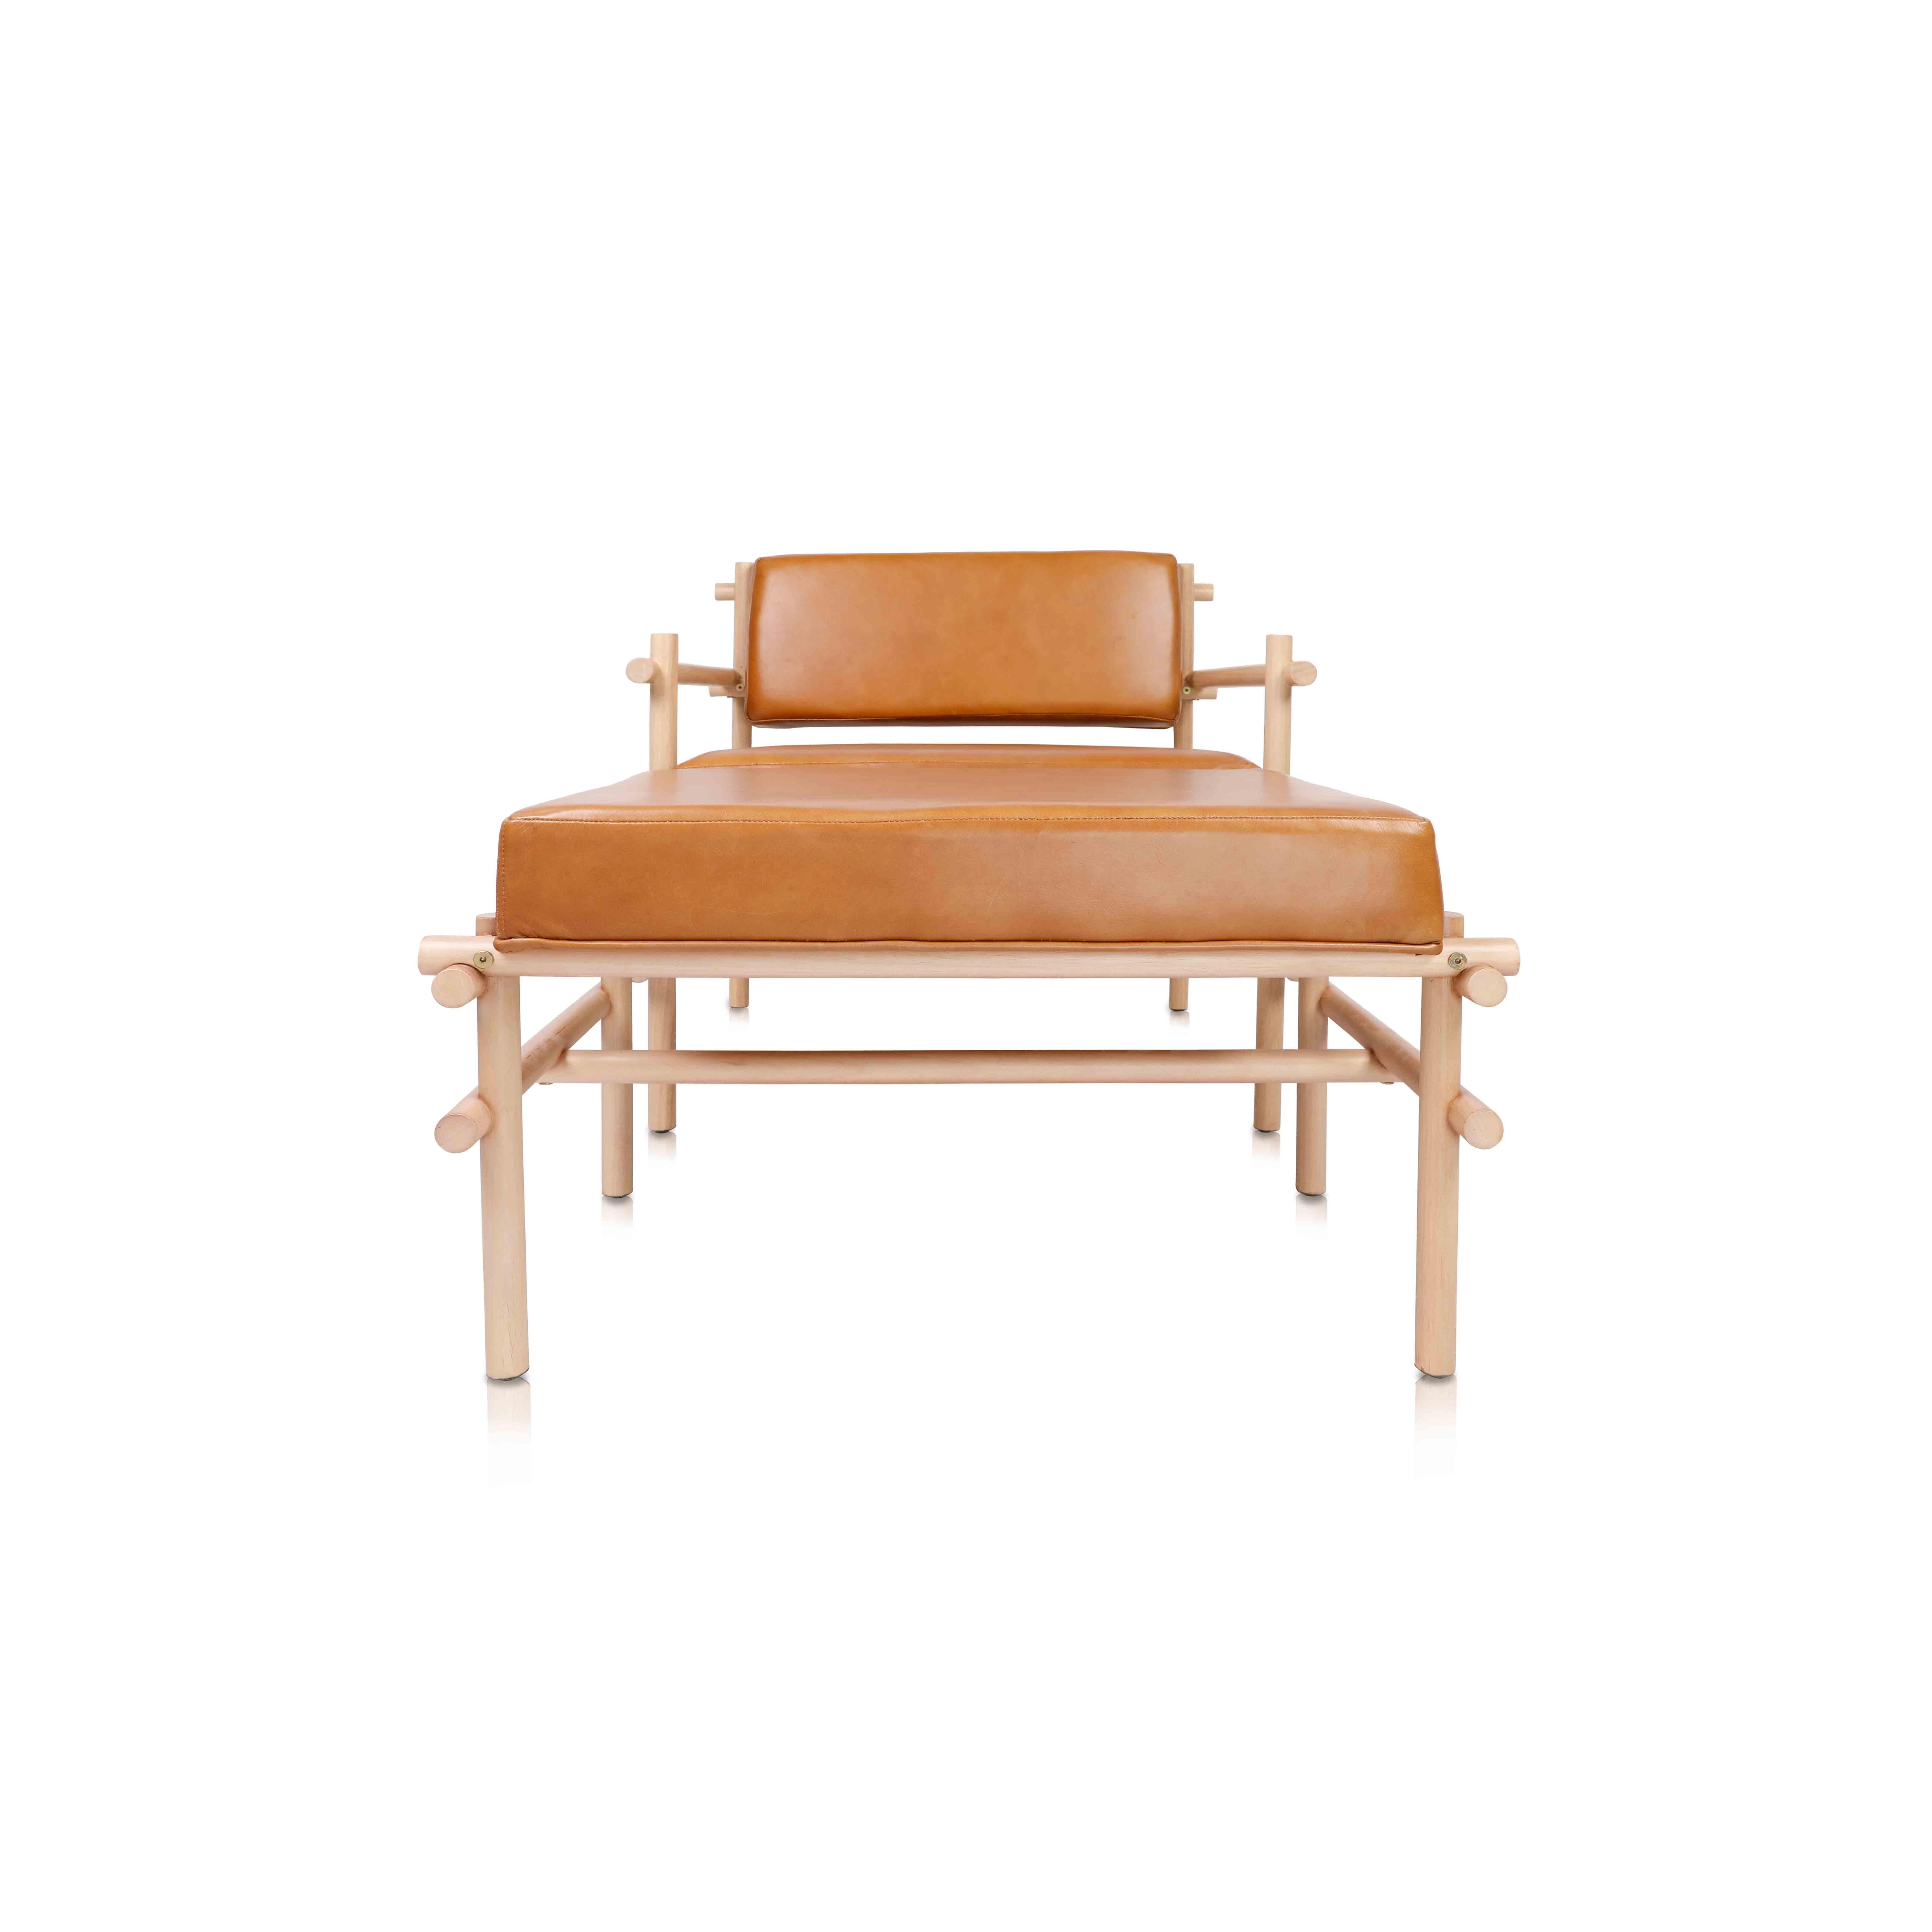 Minimalist Natural Brazilian Wood Pipa Armchair in Naked Style from Tiago Curioni For Sale